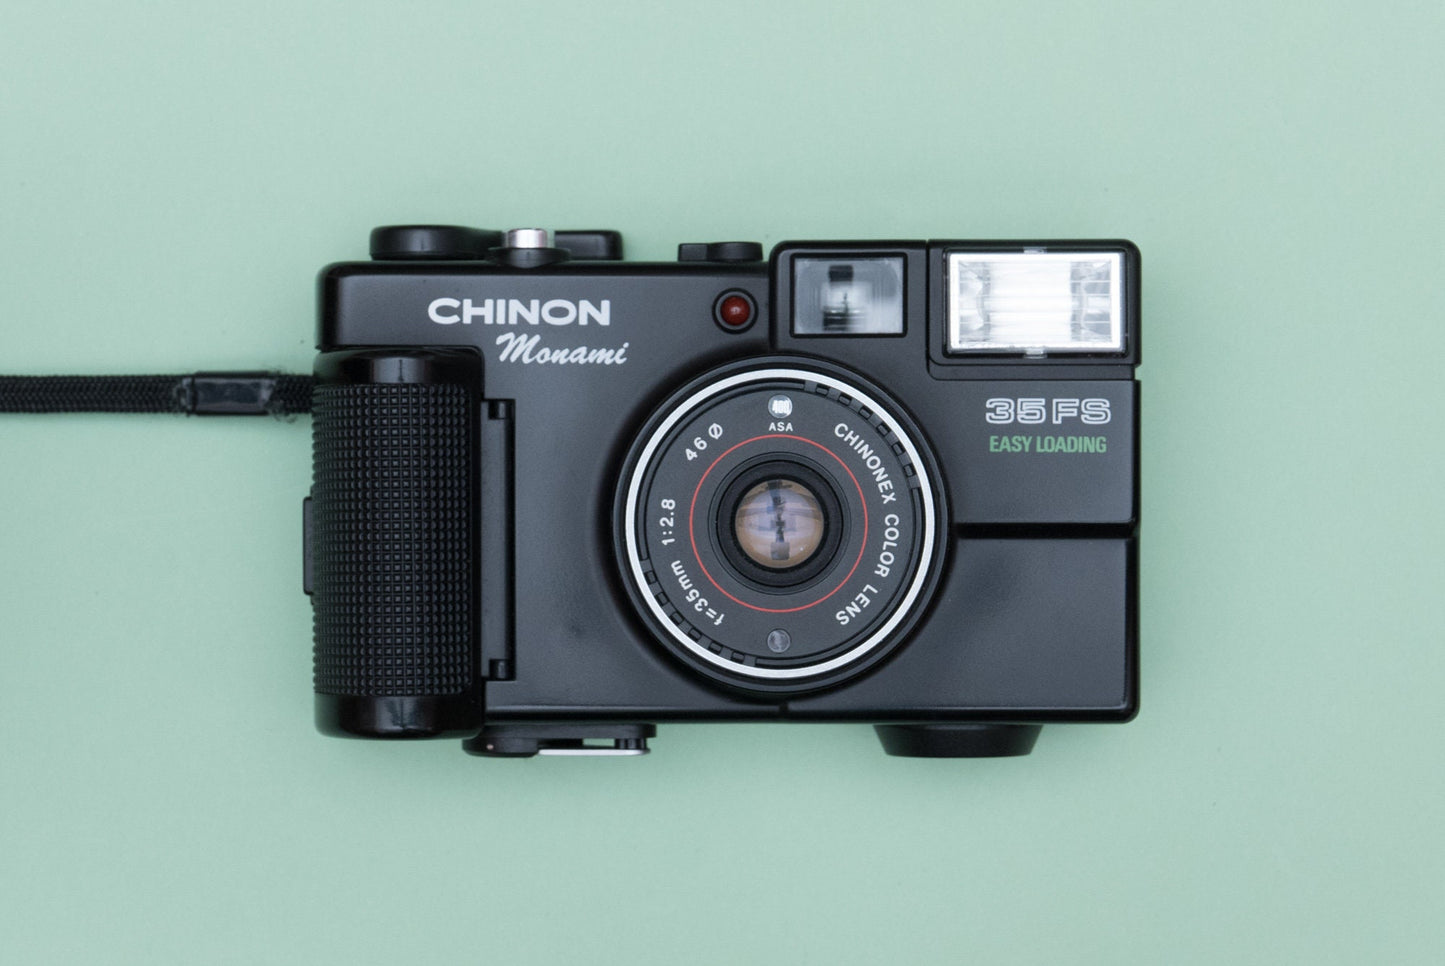 Chinon Monami 35 FS Compact 35mm Film Camera Point and Shoot